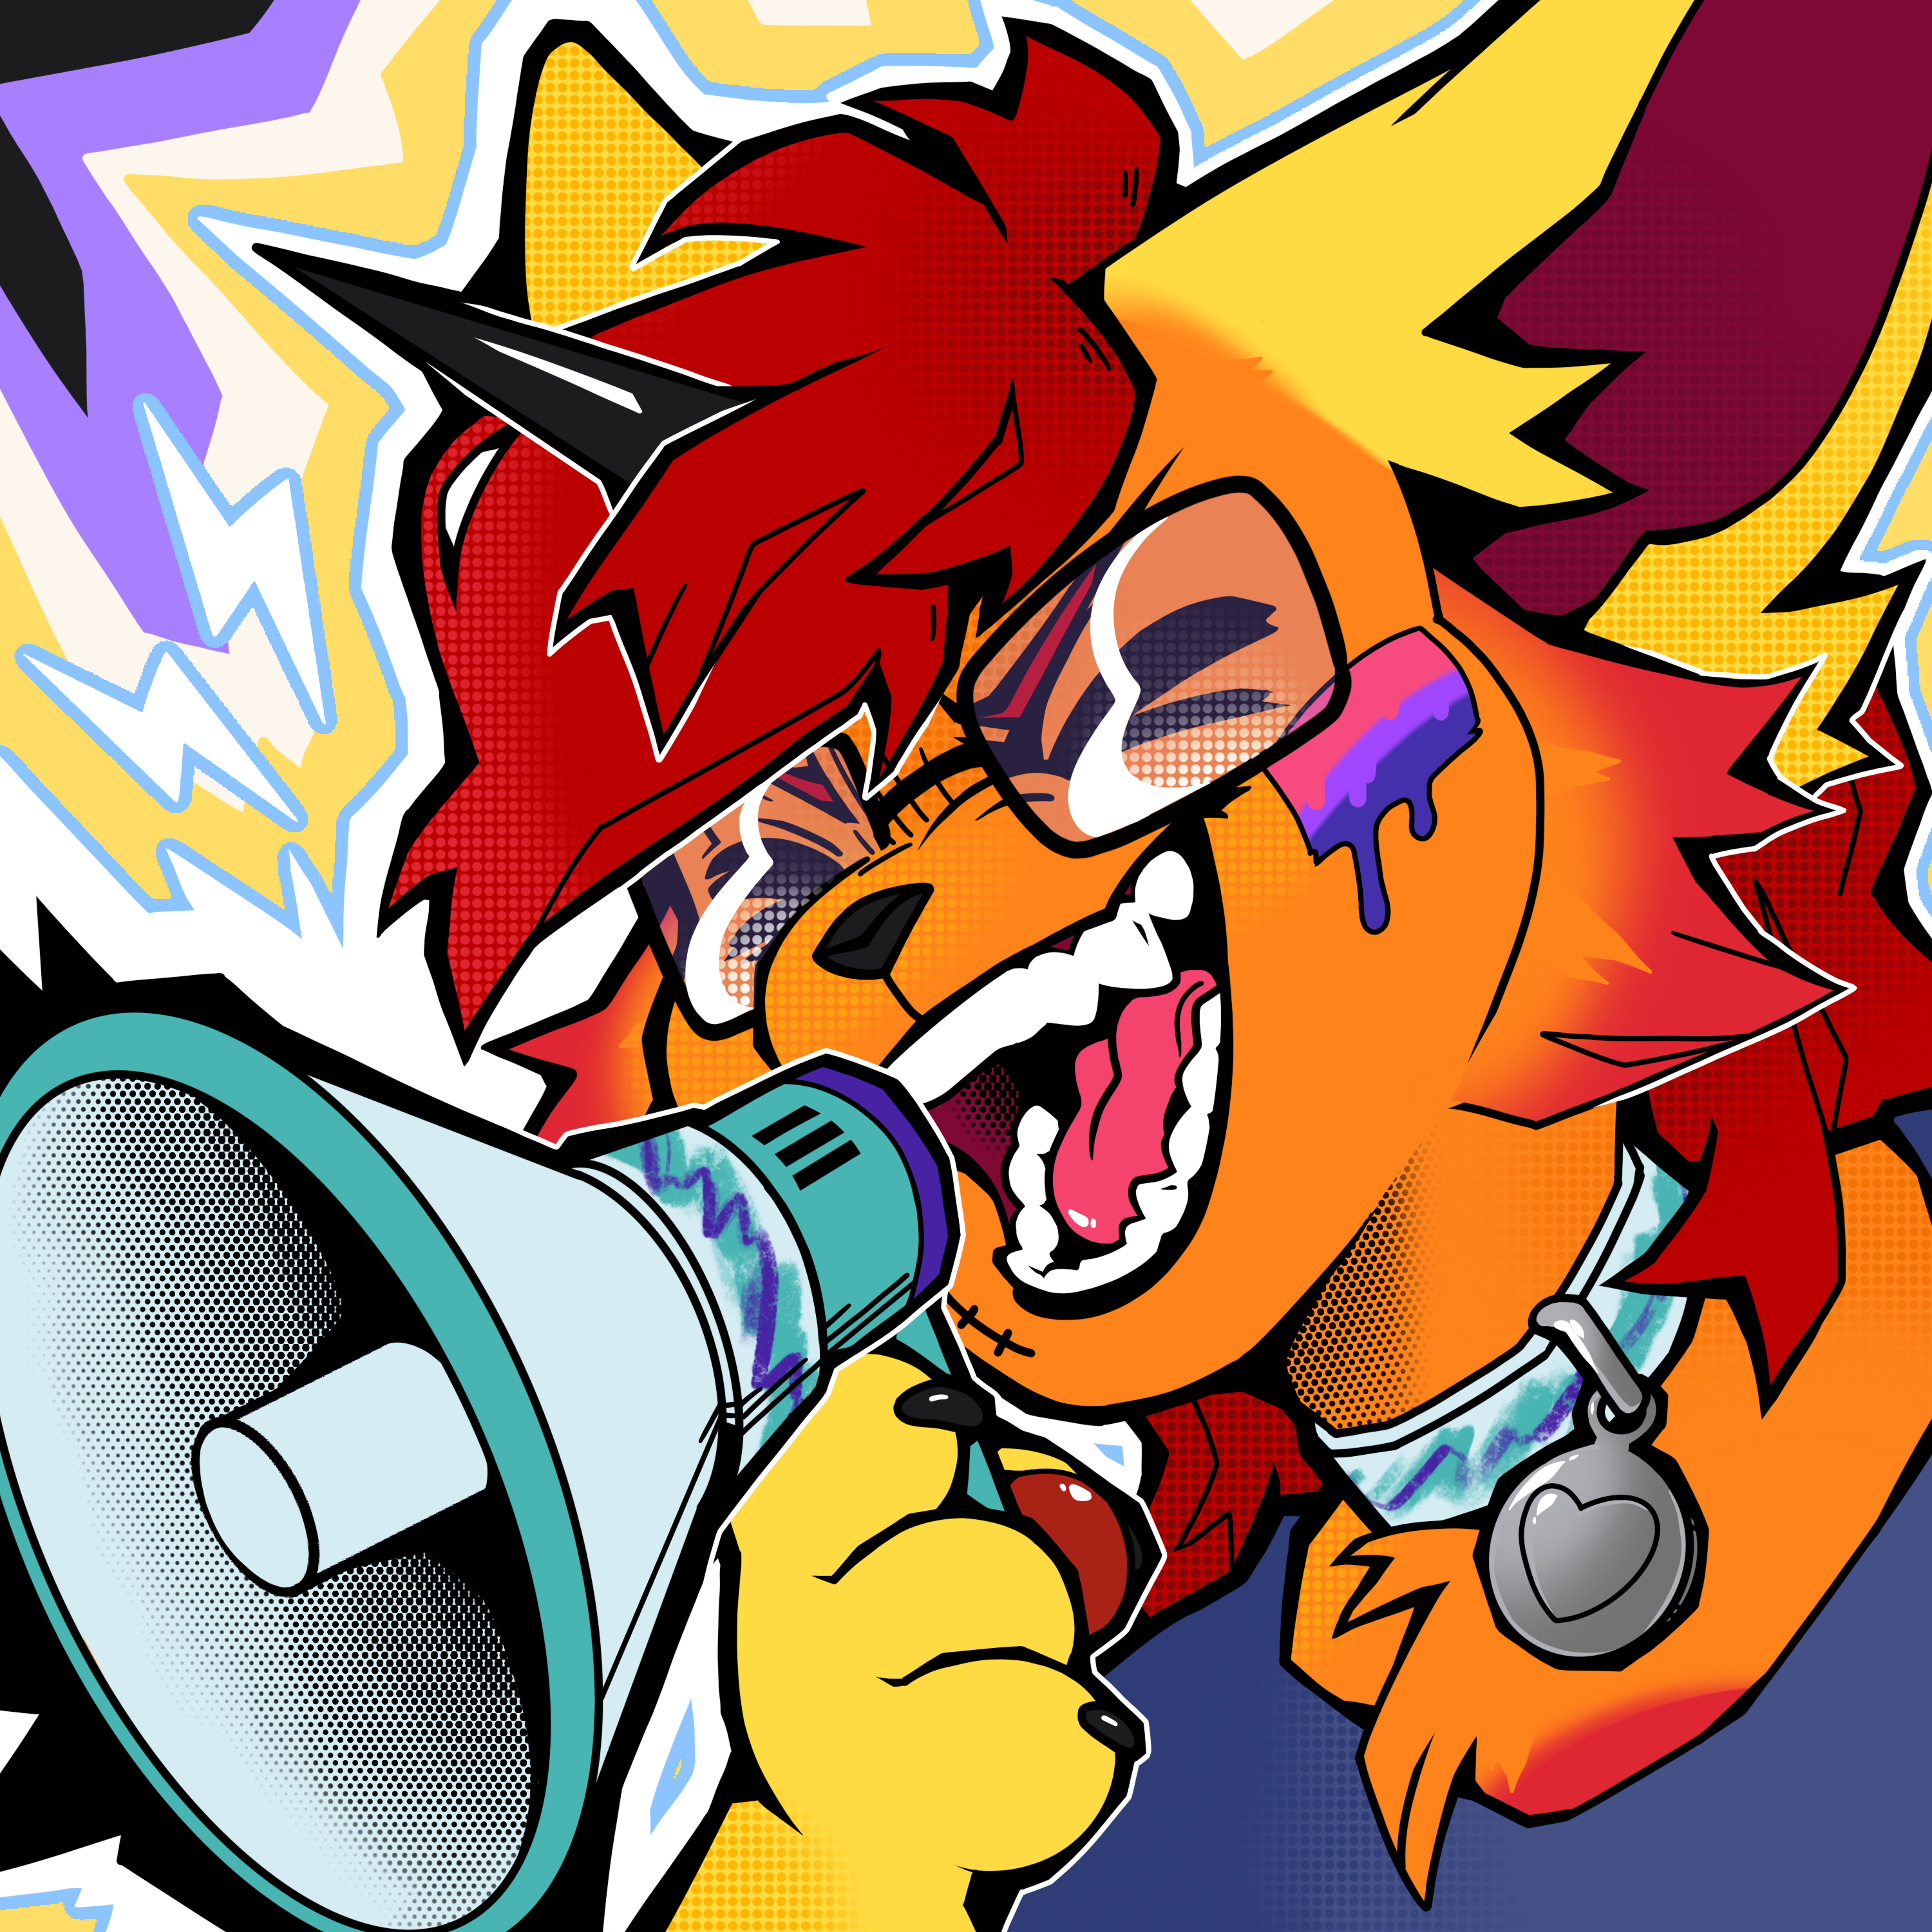 A digital drawing of Lexicon happily yelling into a megaphone with the Solo jazz cup pattern on it. They have the bisexual flag painted on their face. The background is the nonbinary flag.